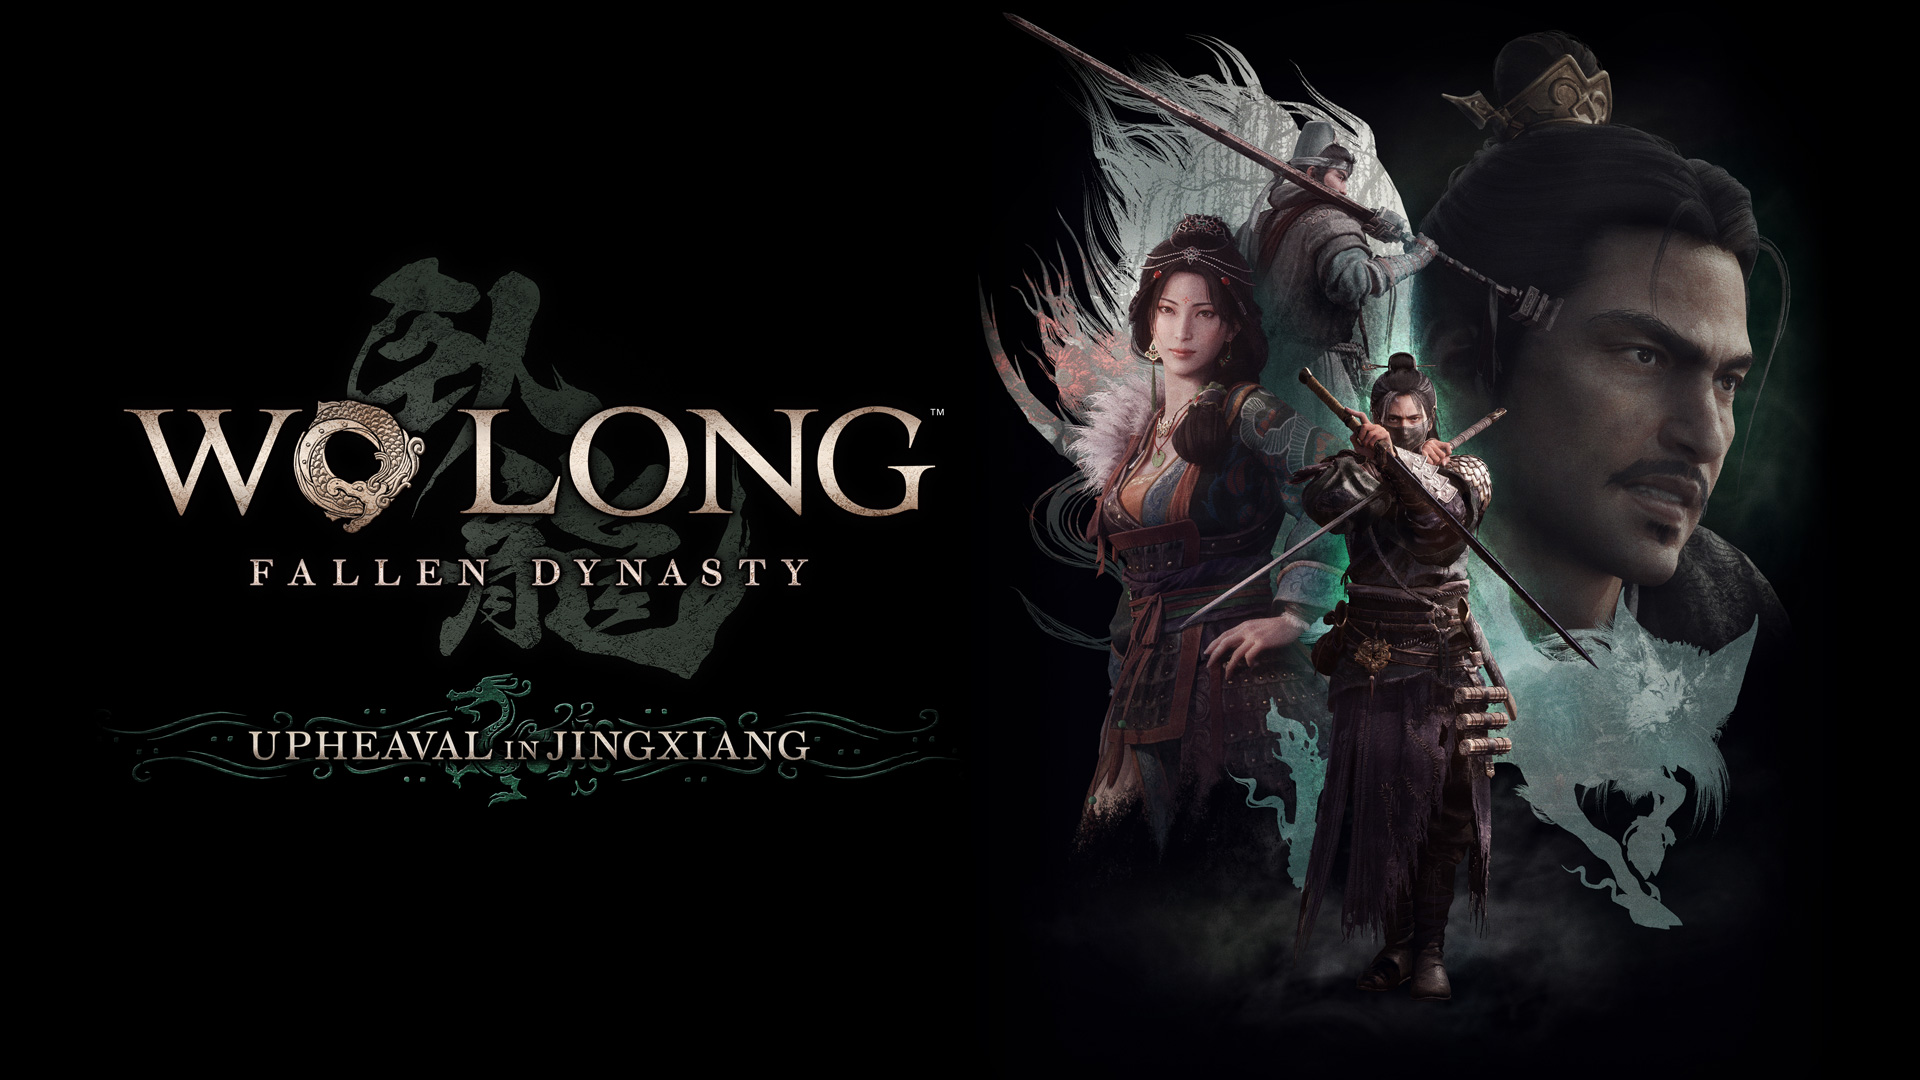 Wo Long: Fallen Dynasty DLC 3 — Upheaval in Jingxiang Now Available; Adds Ridable Divine Beast